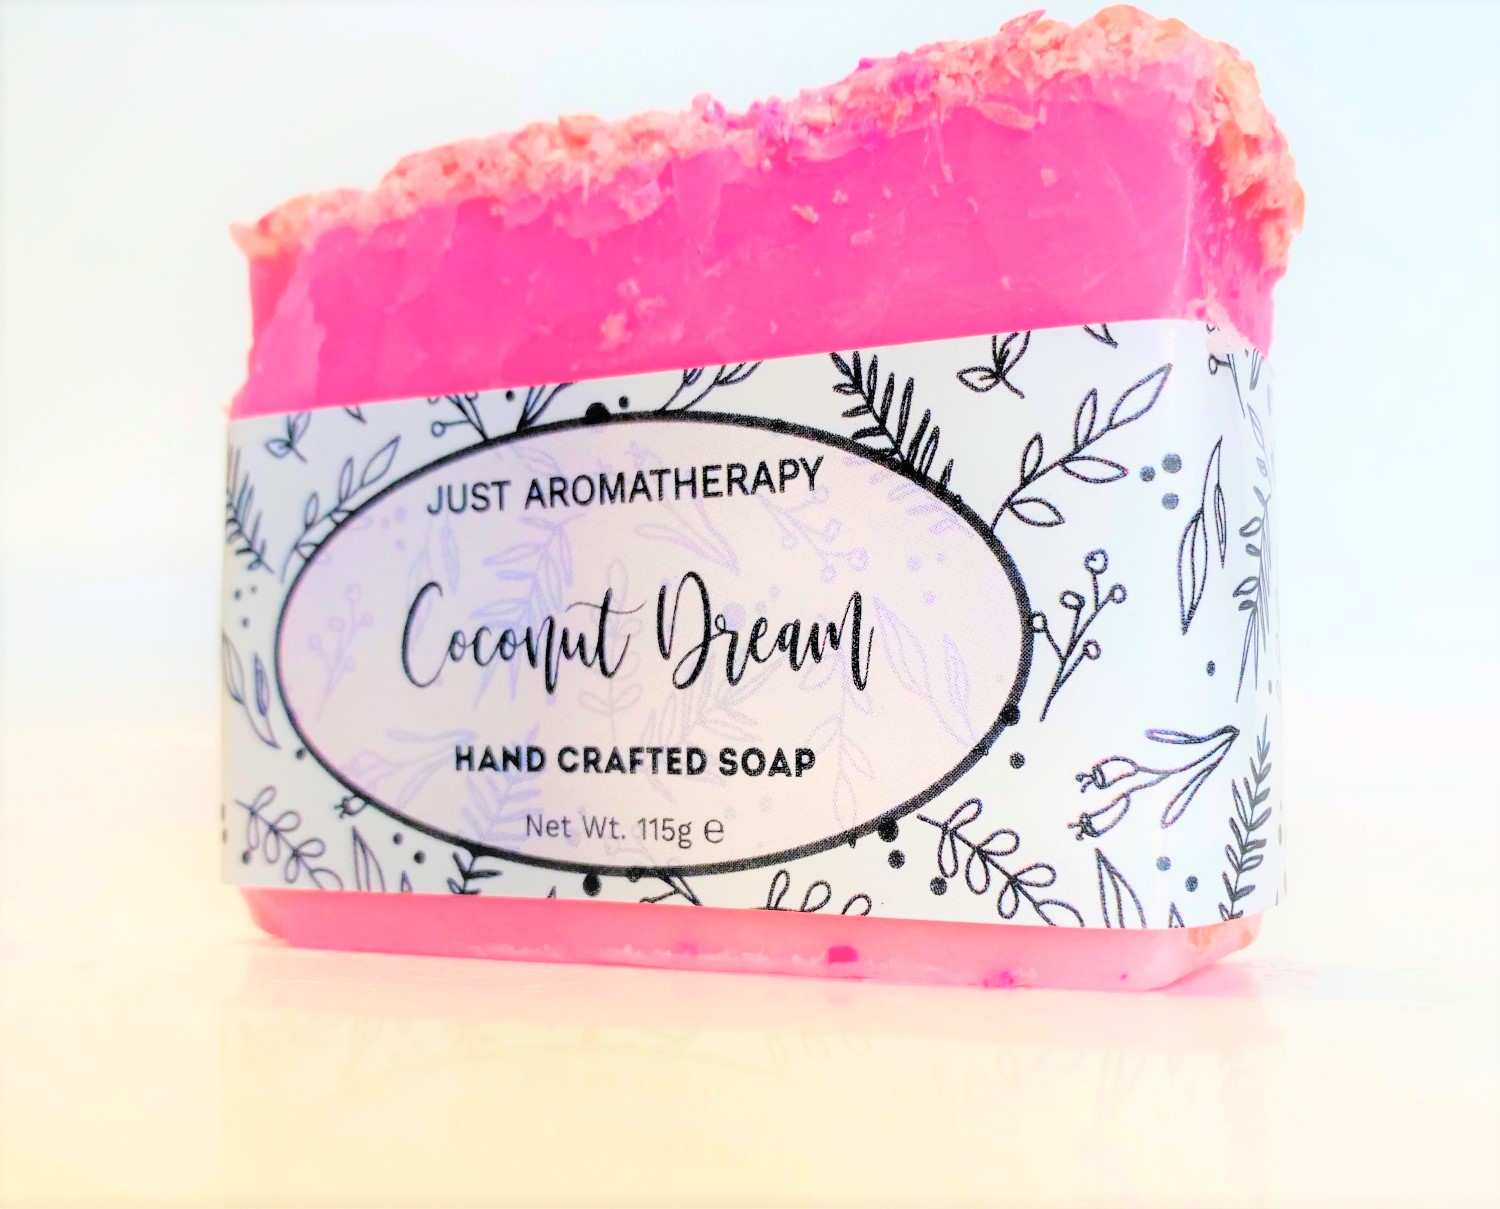 Coconut Dream - Wild & Natural Hand Crafted Soap